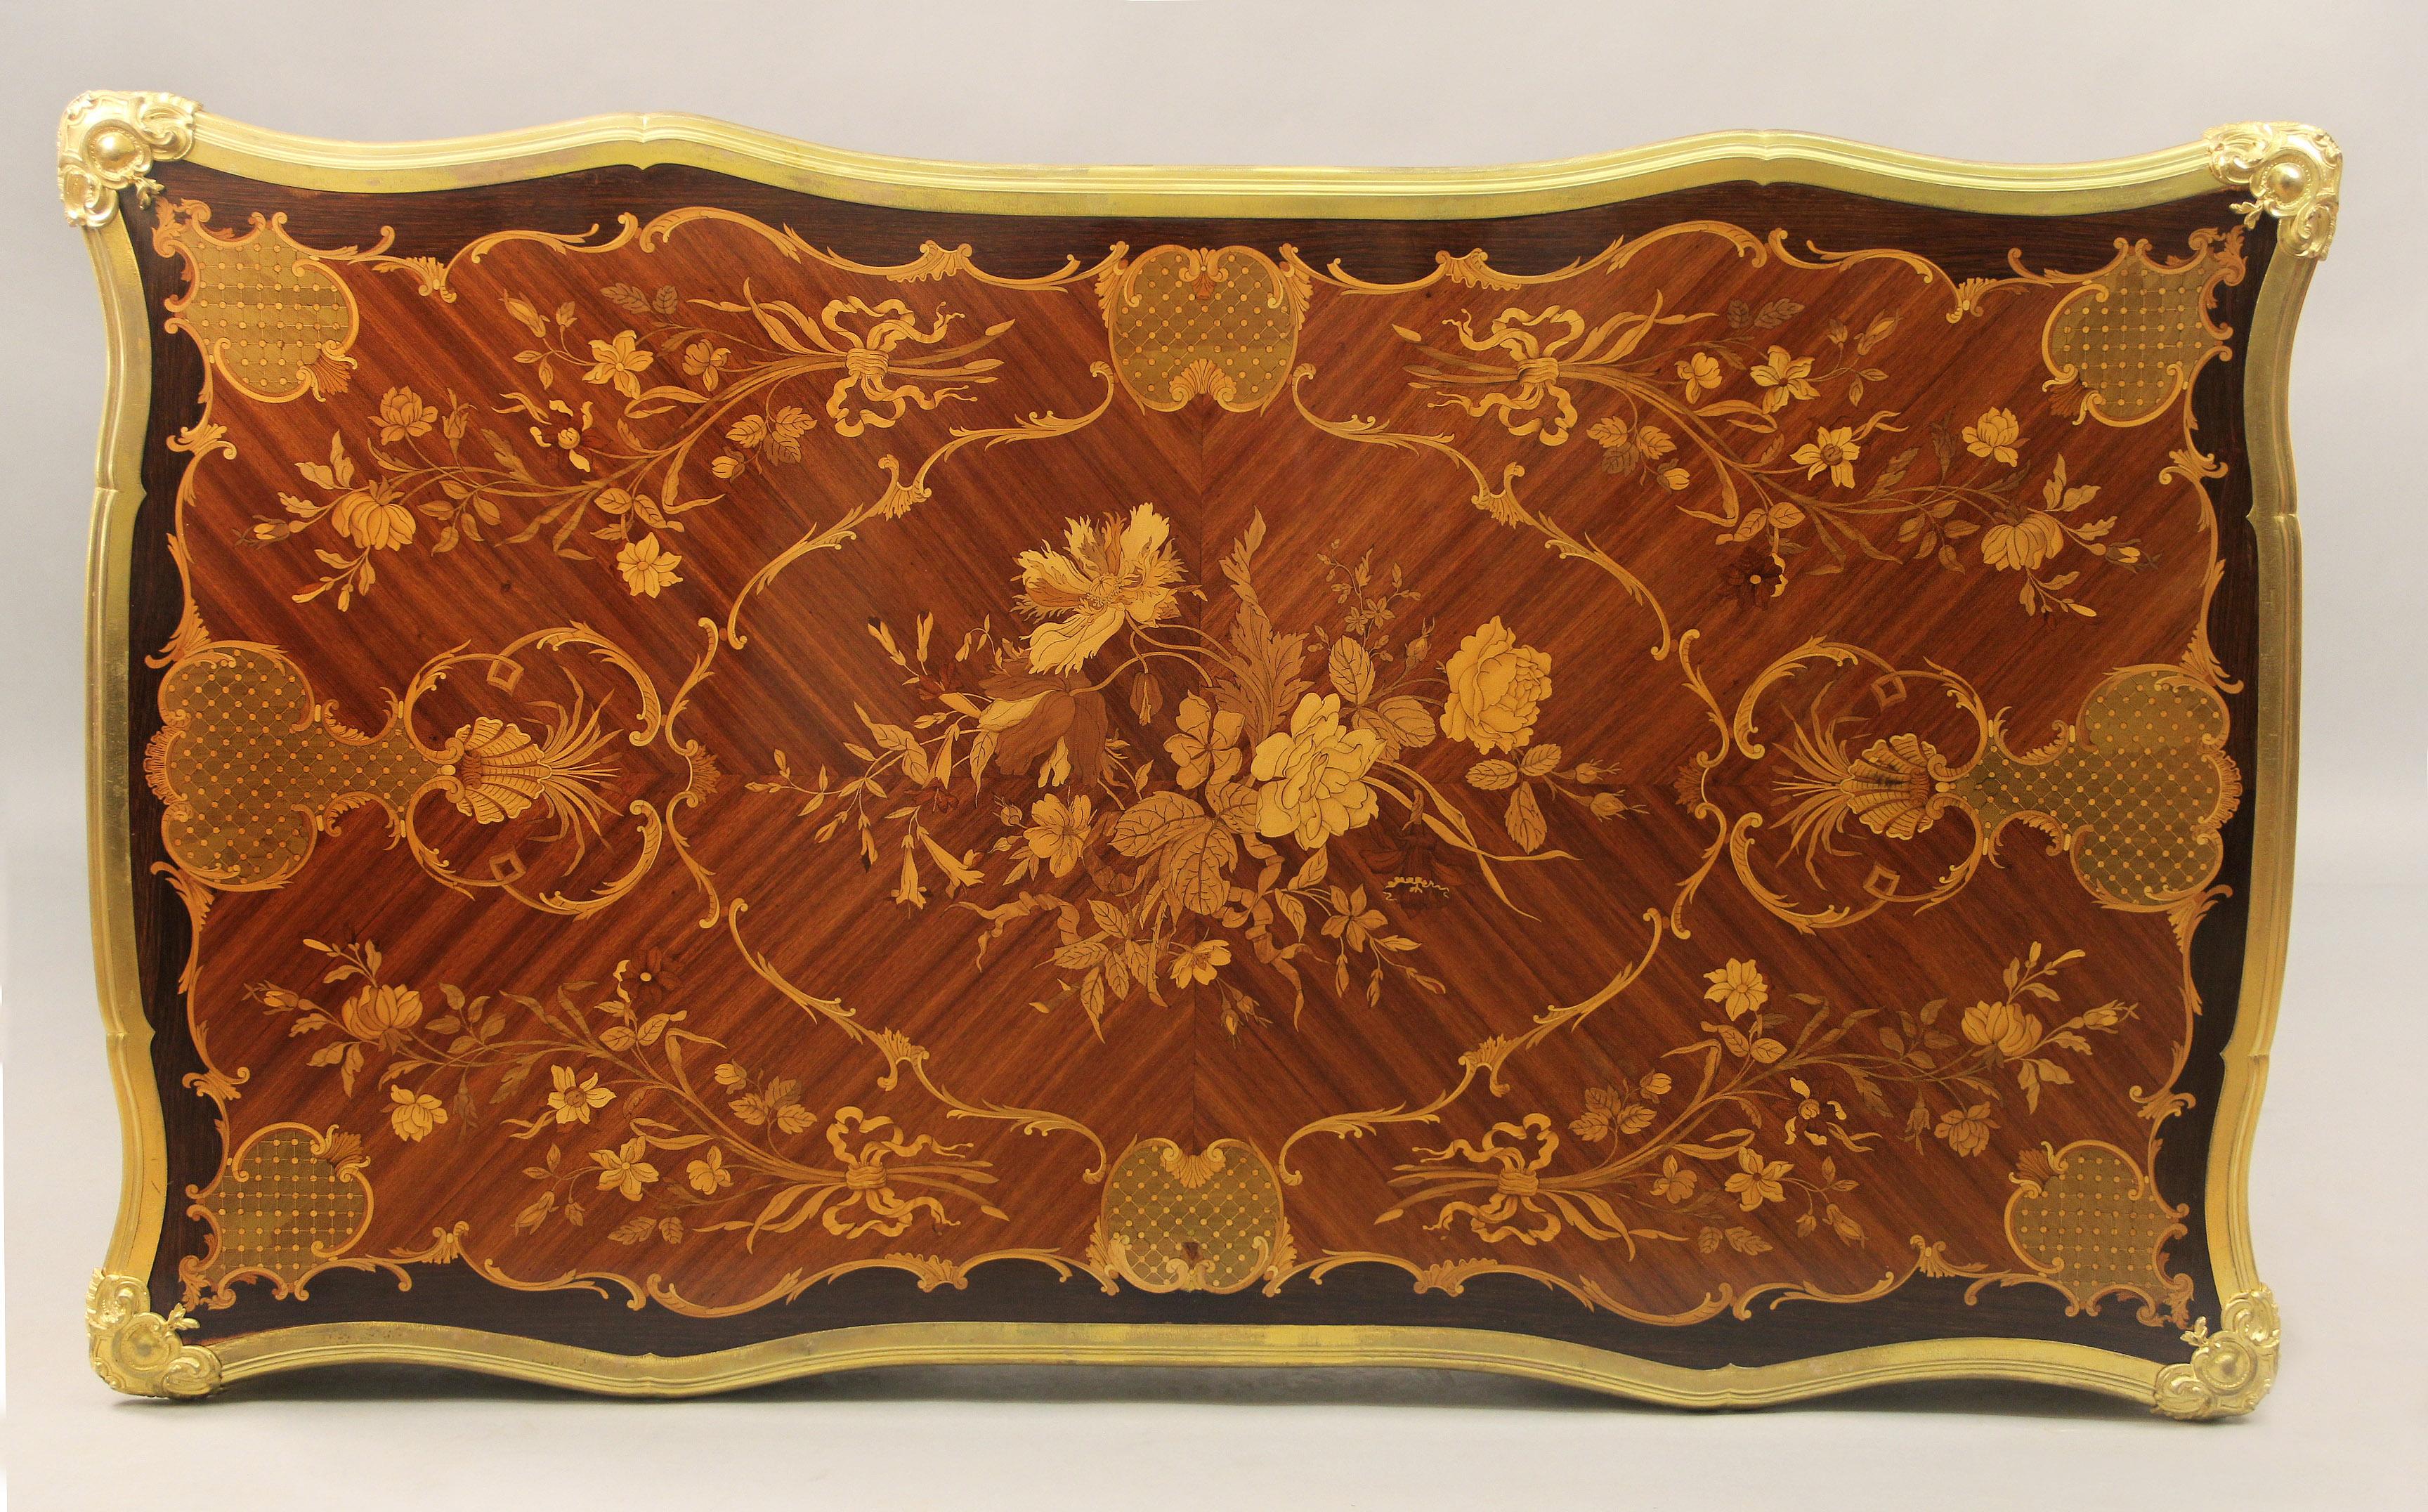 A fantastic late 19th century Louis XV style gilt bronze-mounted inlaid marquetry table

By Paul Sormani

A wonderful inlaid floral marquetry top with a bronze boarder above three inlaid drawers. The sides and back with additional floral